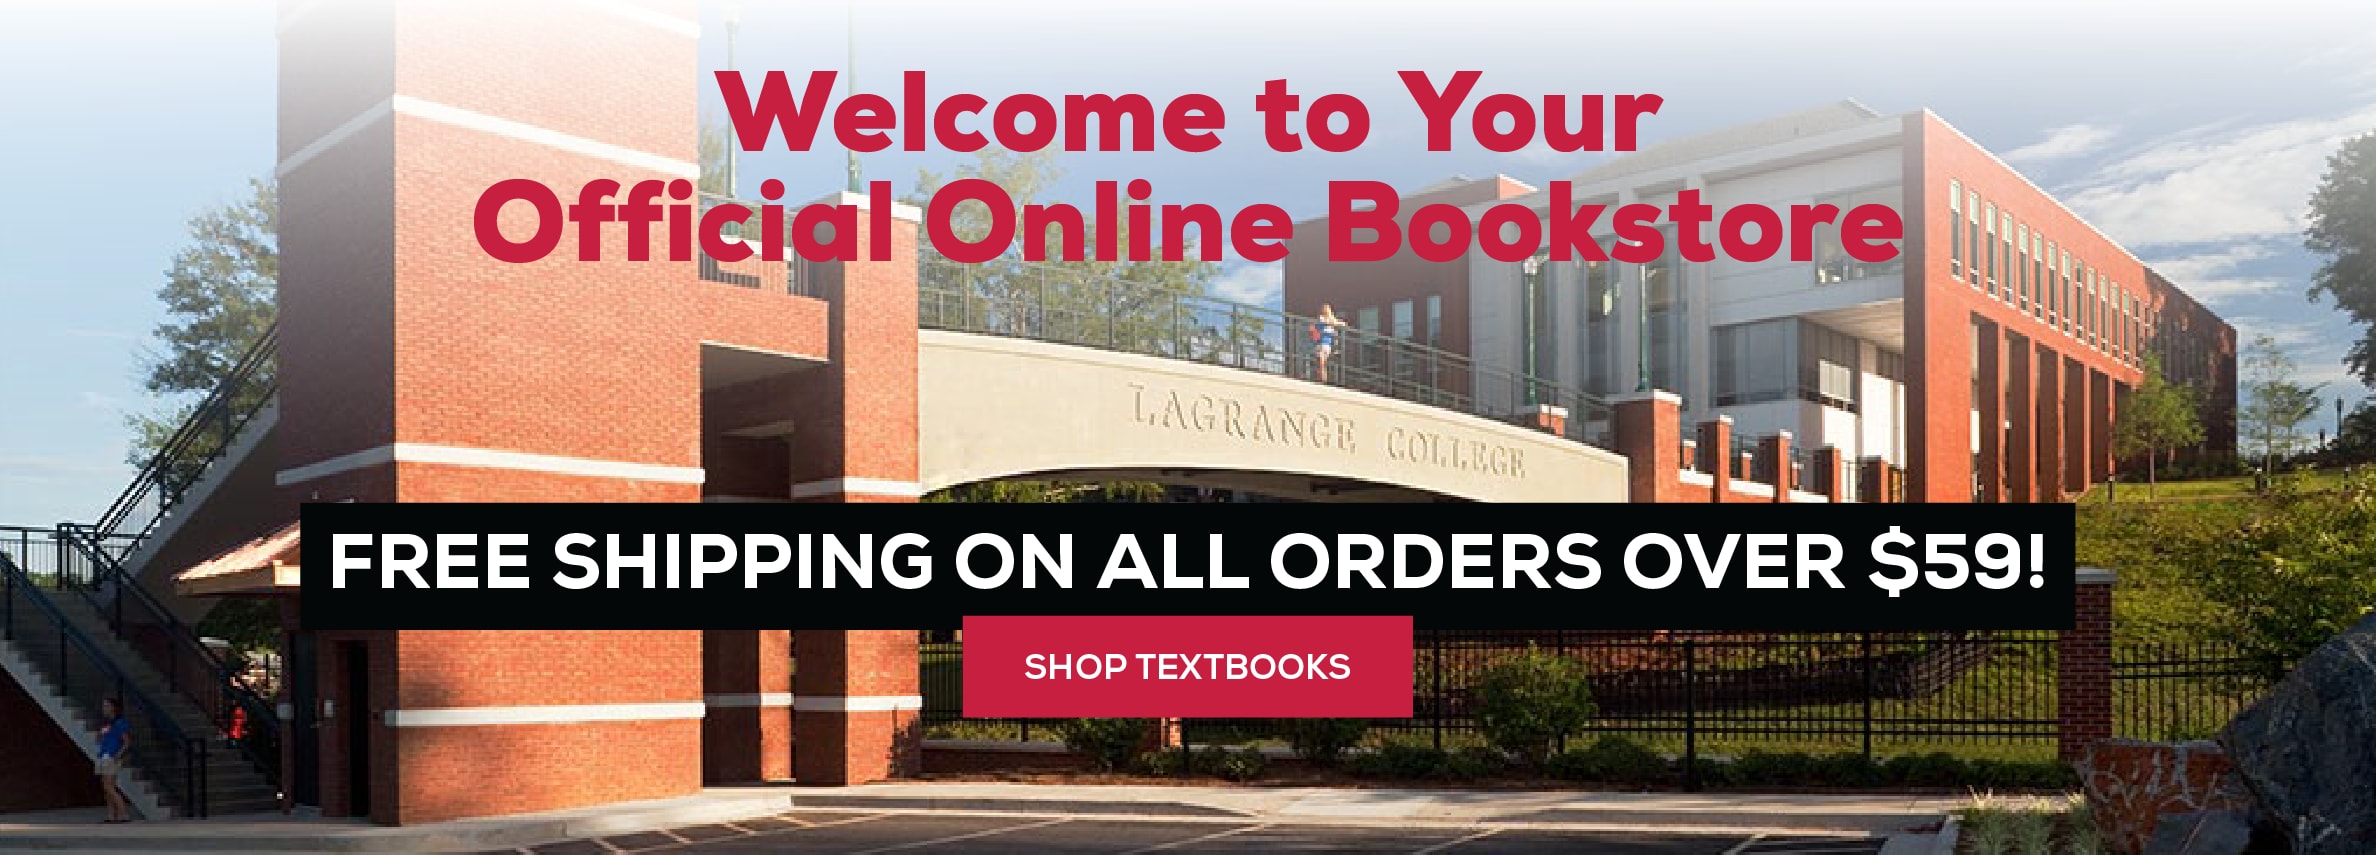 Welcome to your Official Online Bookstore. Free shipping on all orders over $59! Shop Textbooks